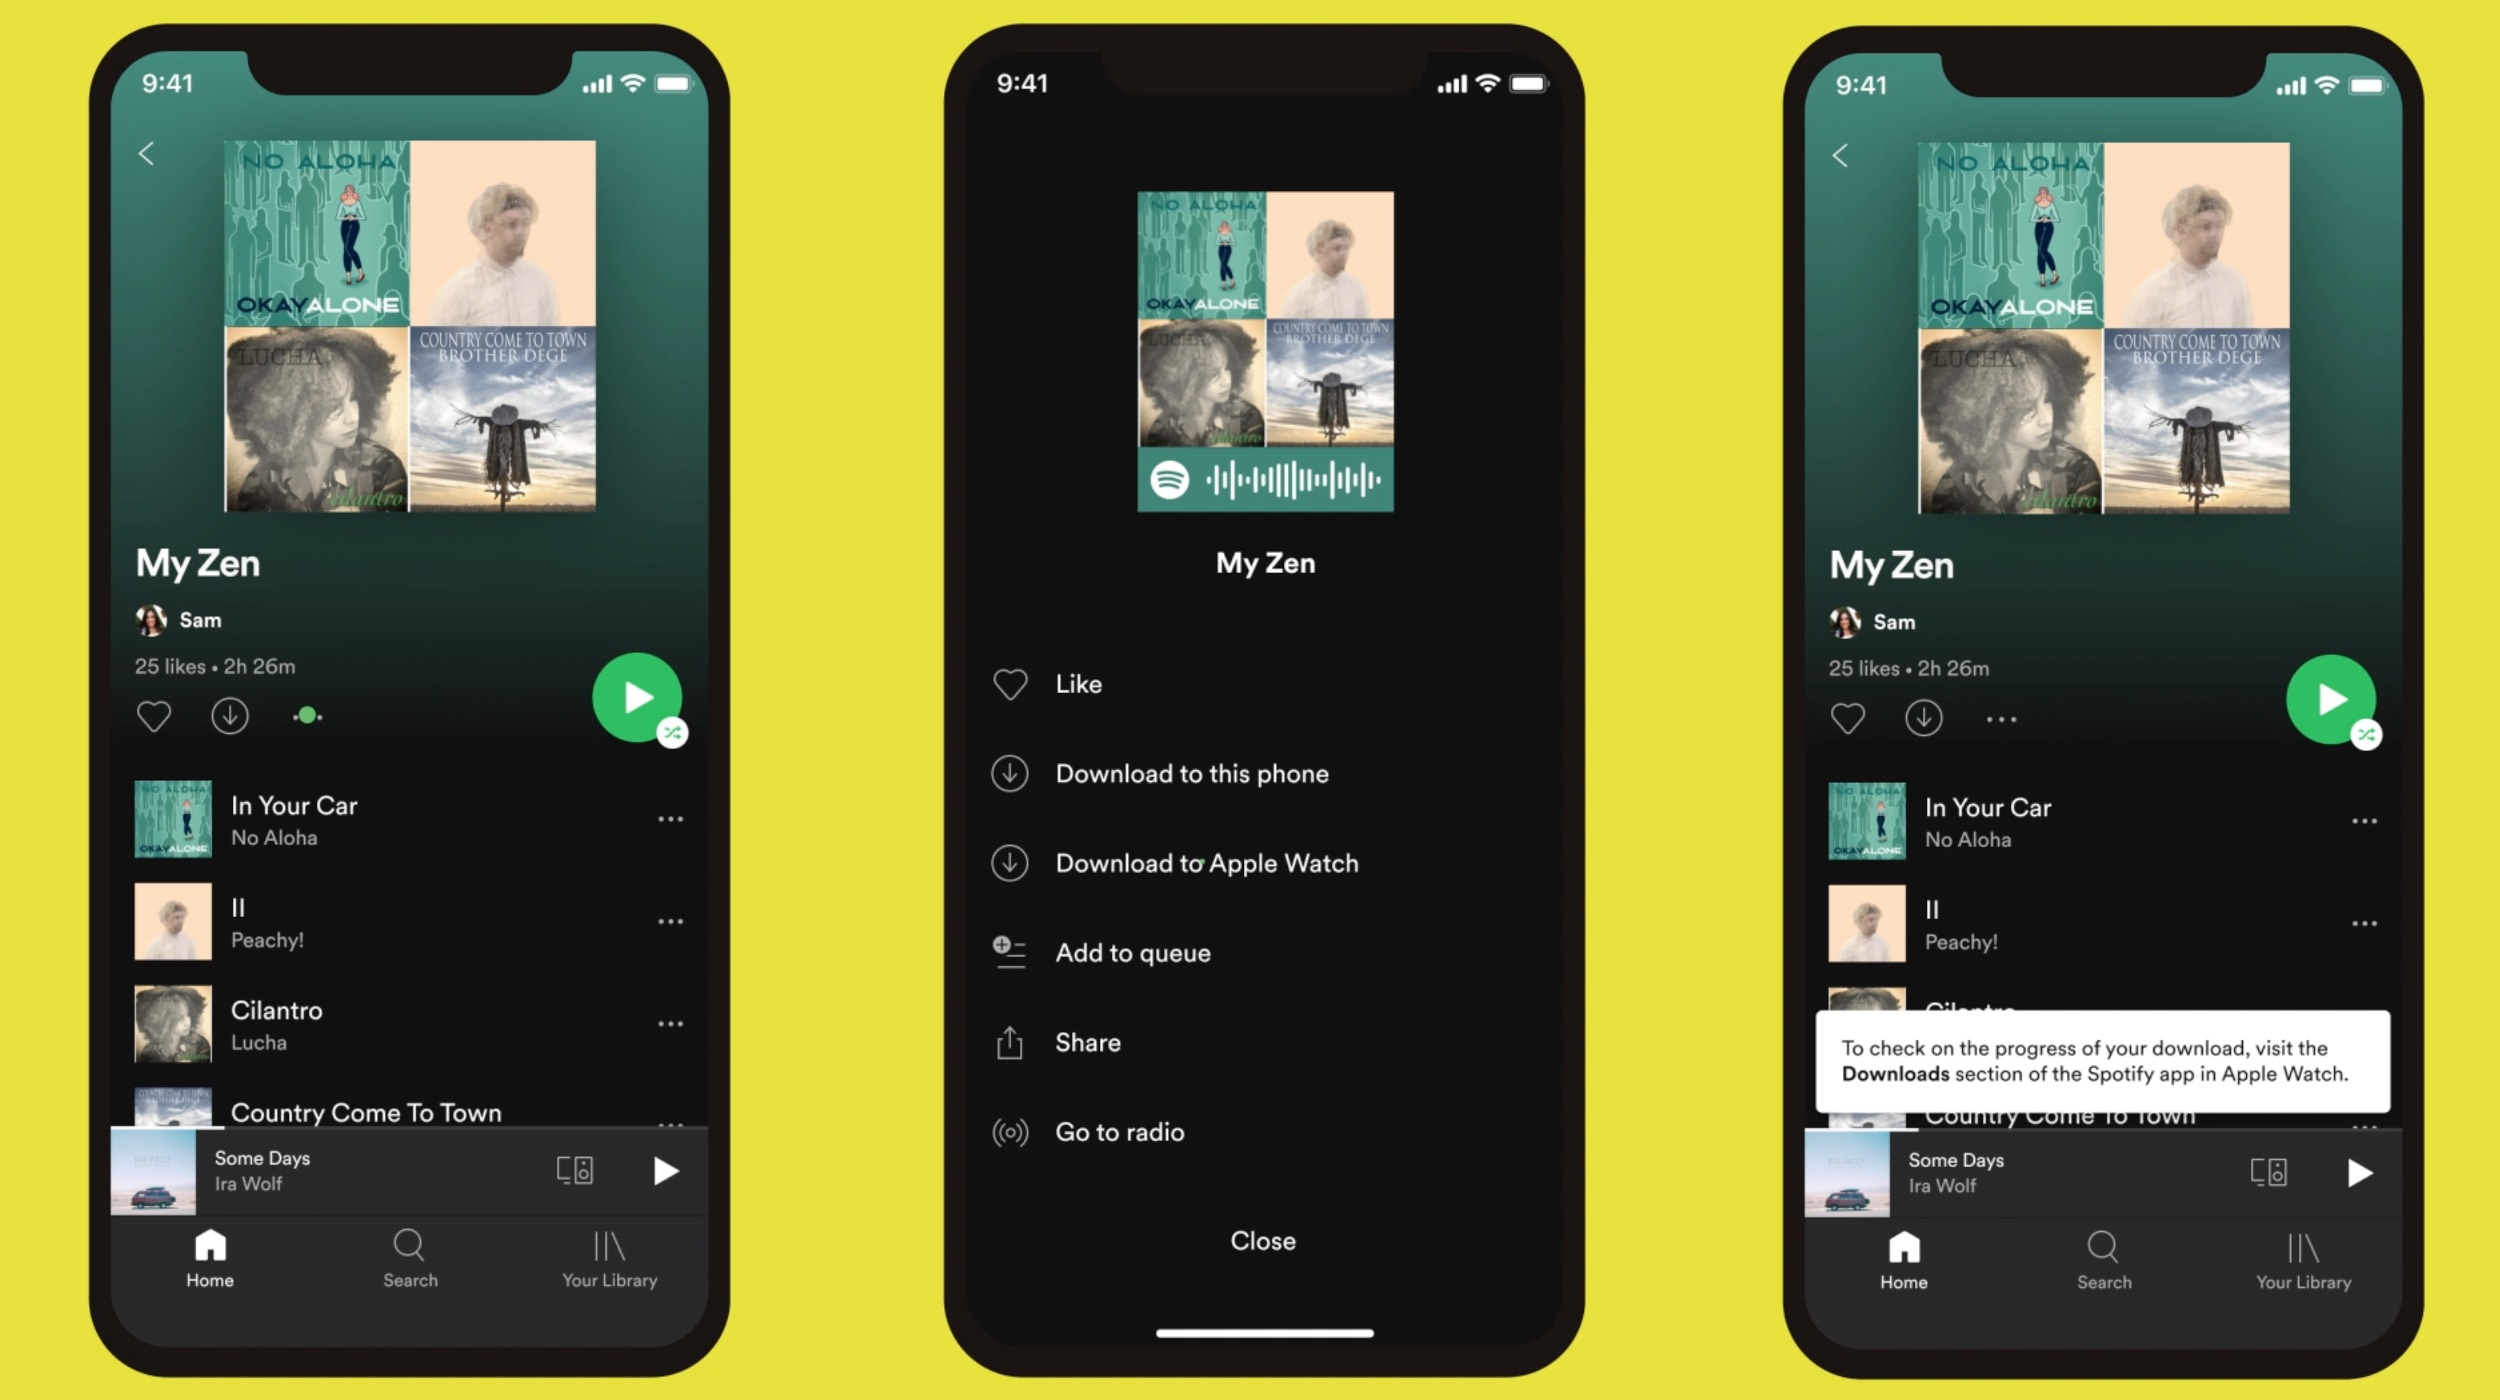 An image showing Spotify for iPhone set against a yellow background. The iPhone is shown running Spotify in offline mode with the "Add to Apple Watch" command selected in the interface.